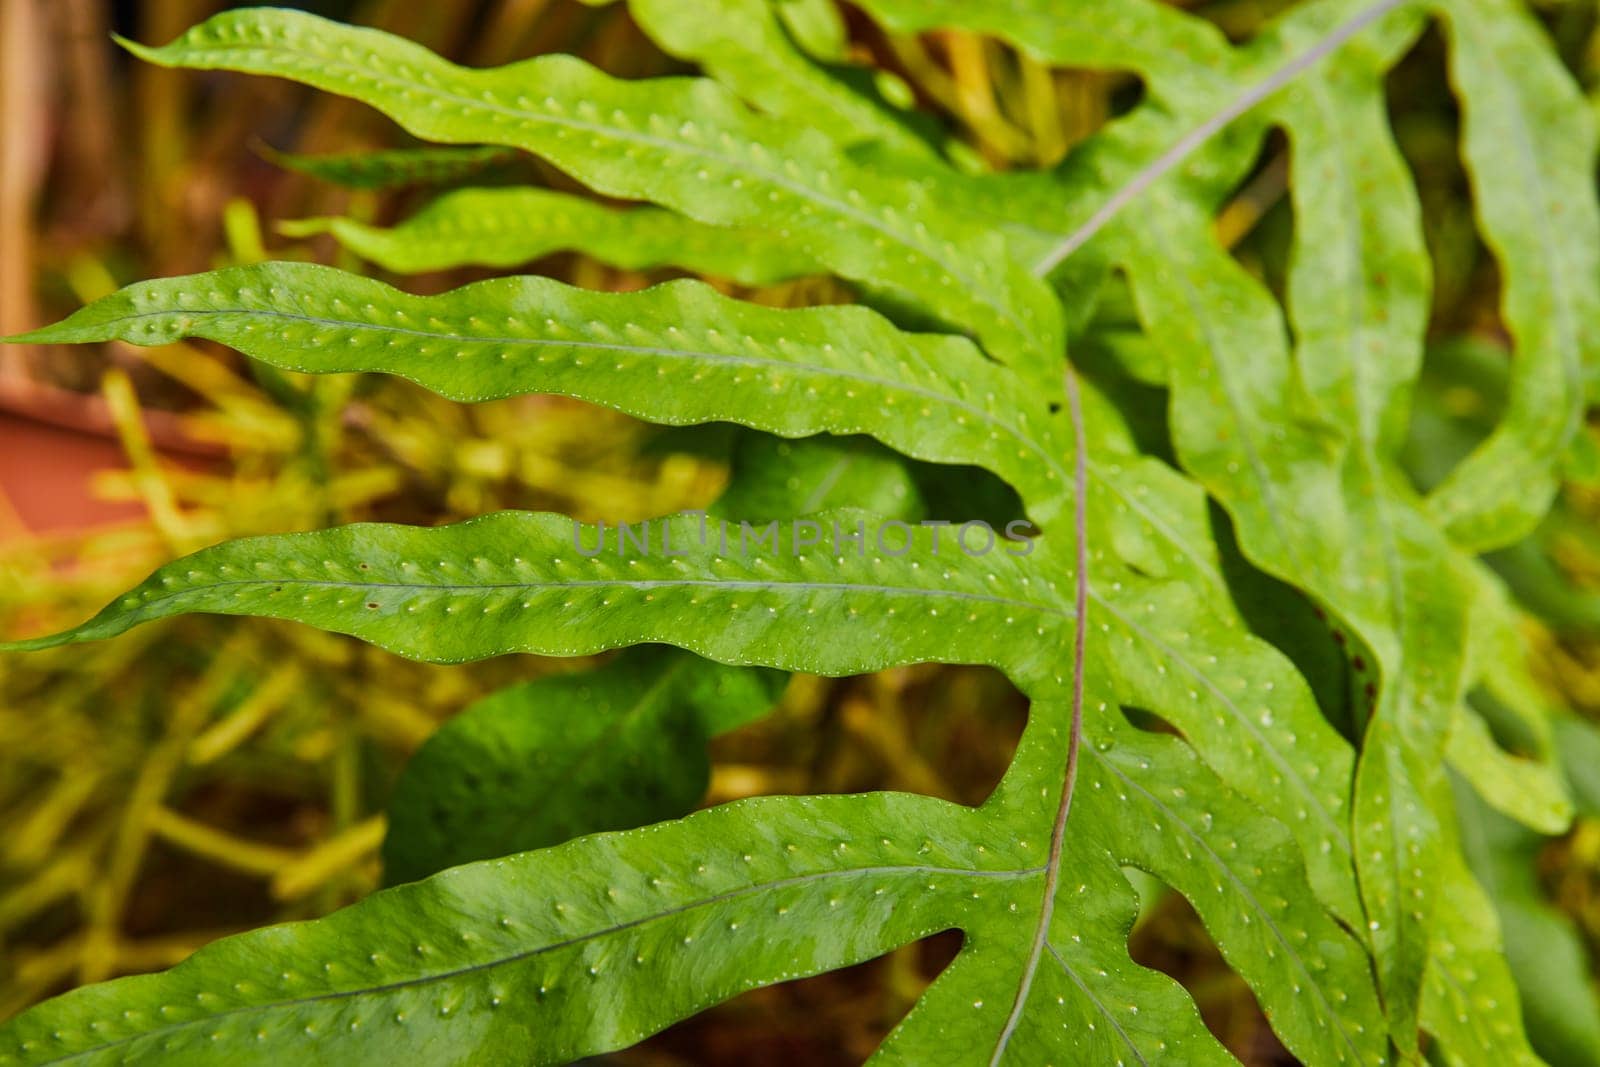 Vibrant Fern Leaves with Dew Drops - Close-Up Perspective by njproductions